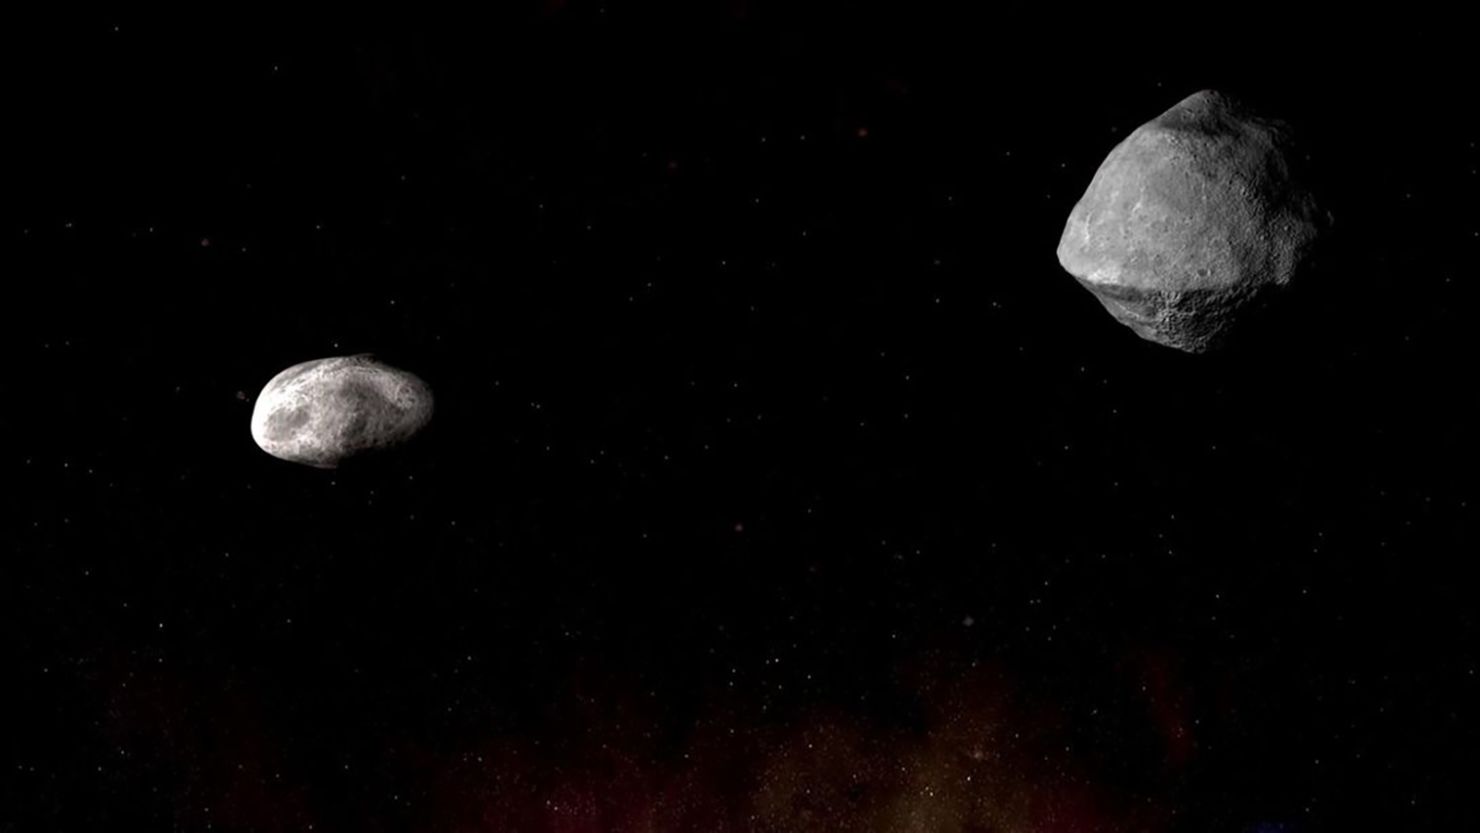 The asteroid 1999 KW4 will swing within 3.2 million miles of the Earth this weekend, scientists say.